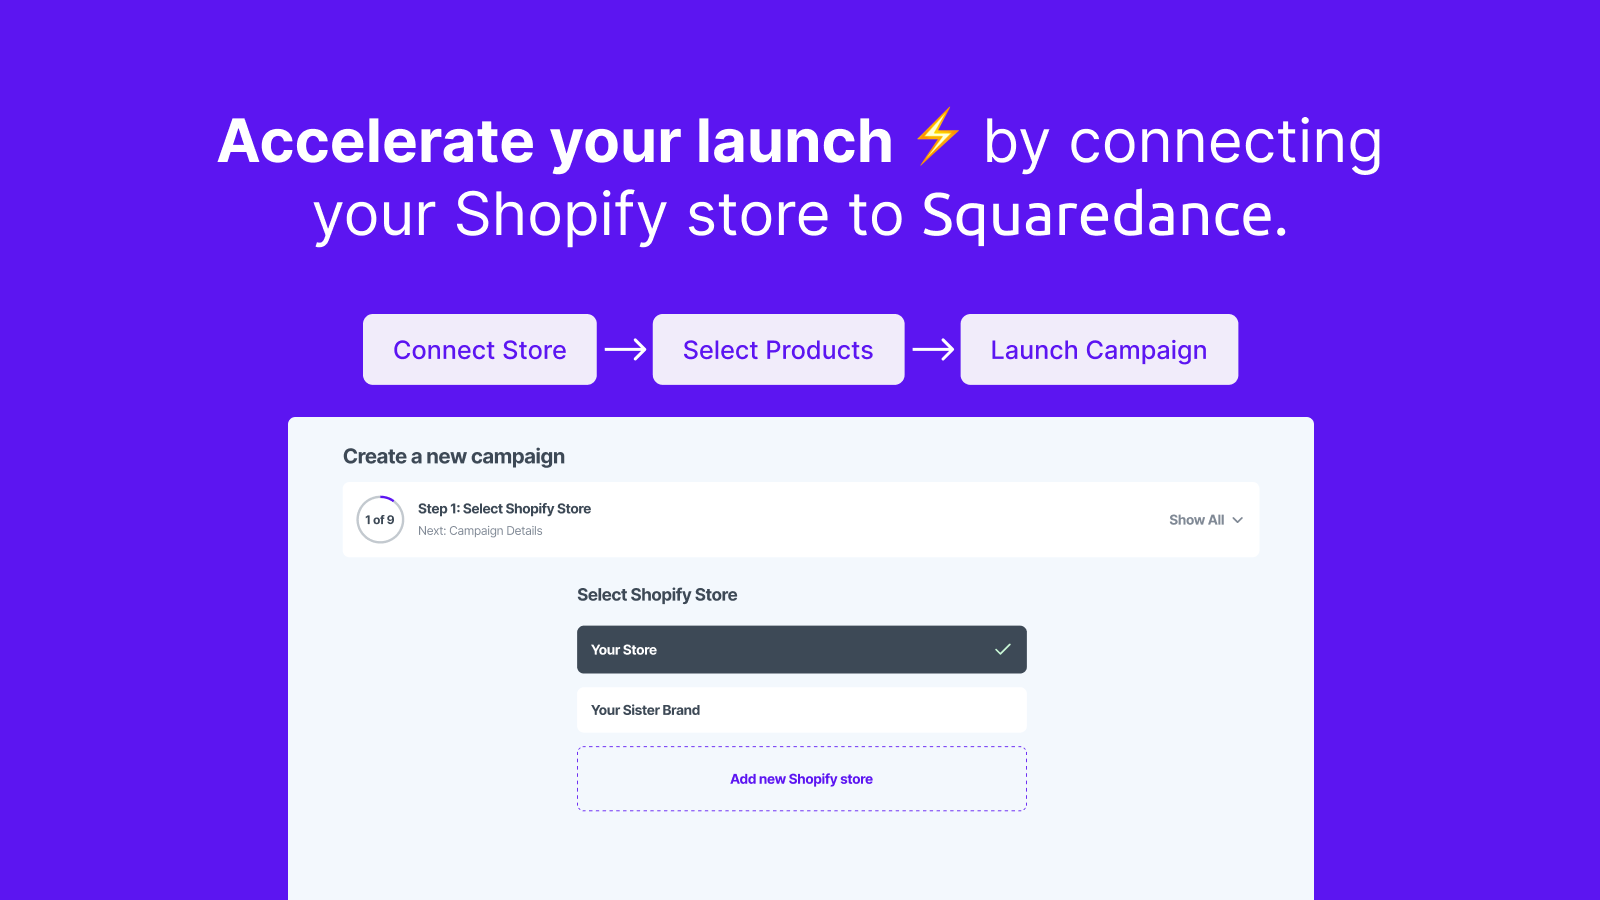 Accelerate your launch by connecting your shopify store 